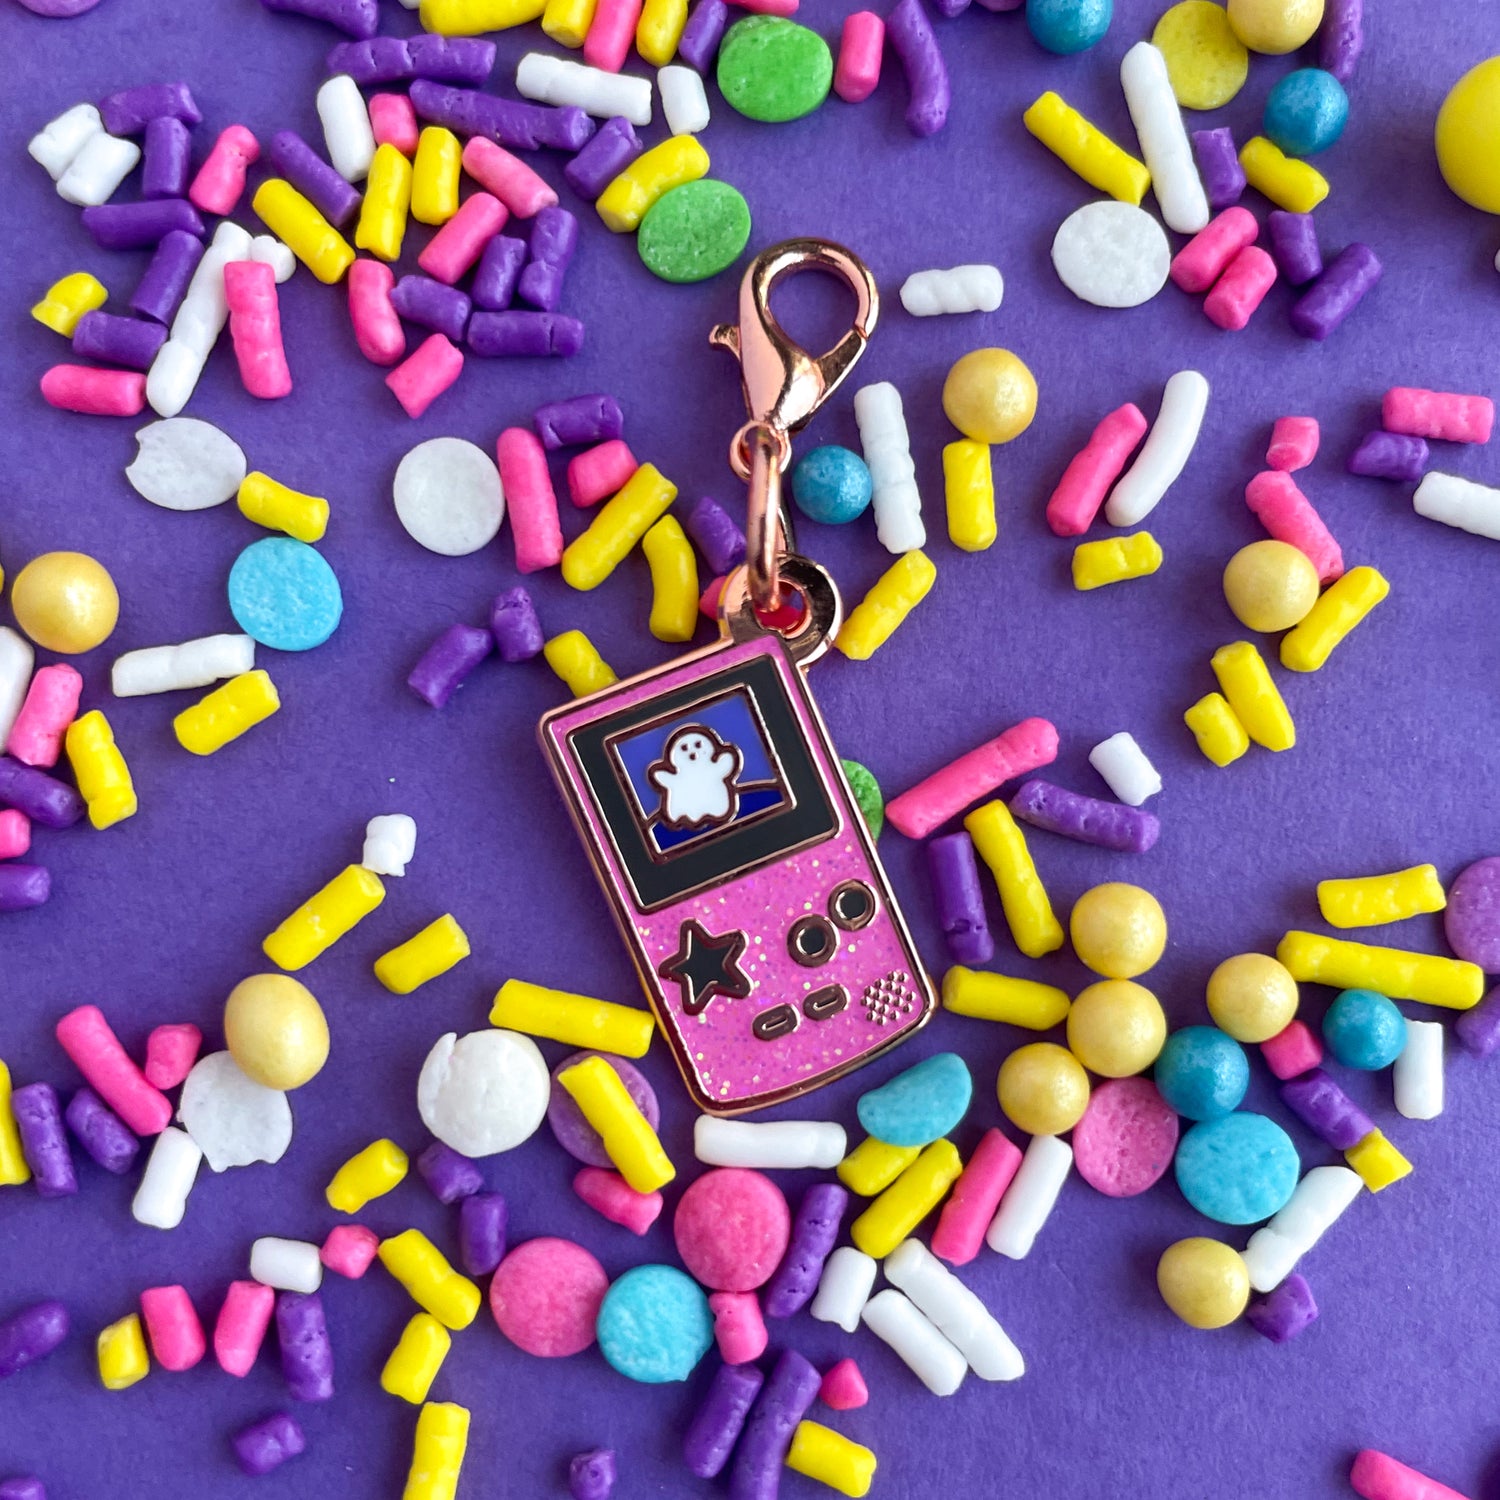 A lobster claw clasp charm that is the shape of a pink glitter Game Boy with a star button and a cute ghost on the screen. It is on a purple background covered in pastel sprinkles.